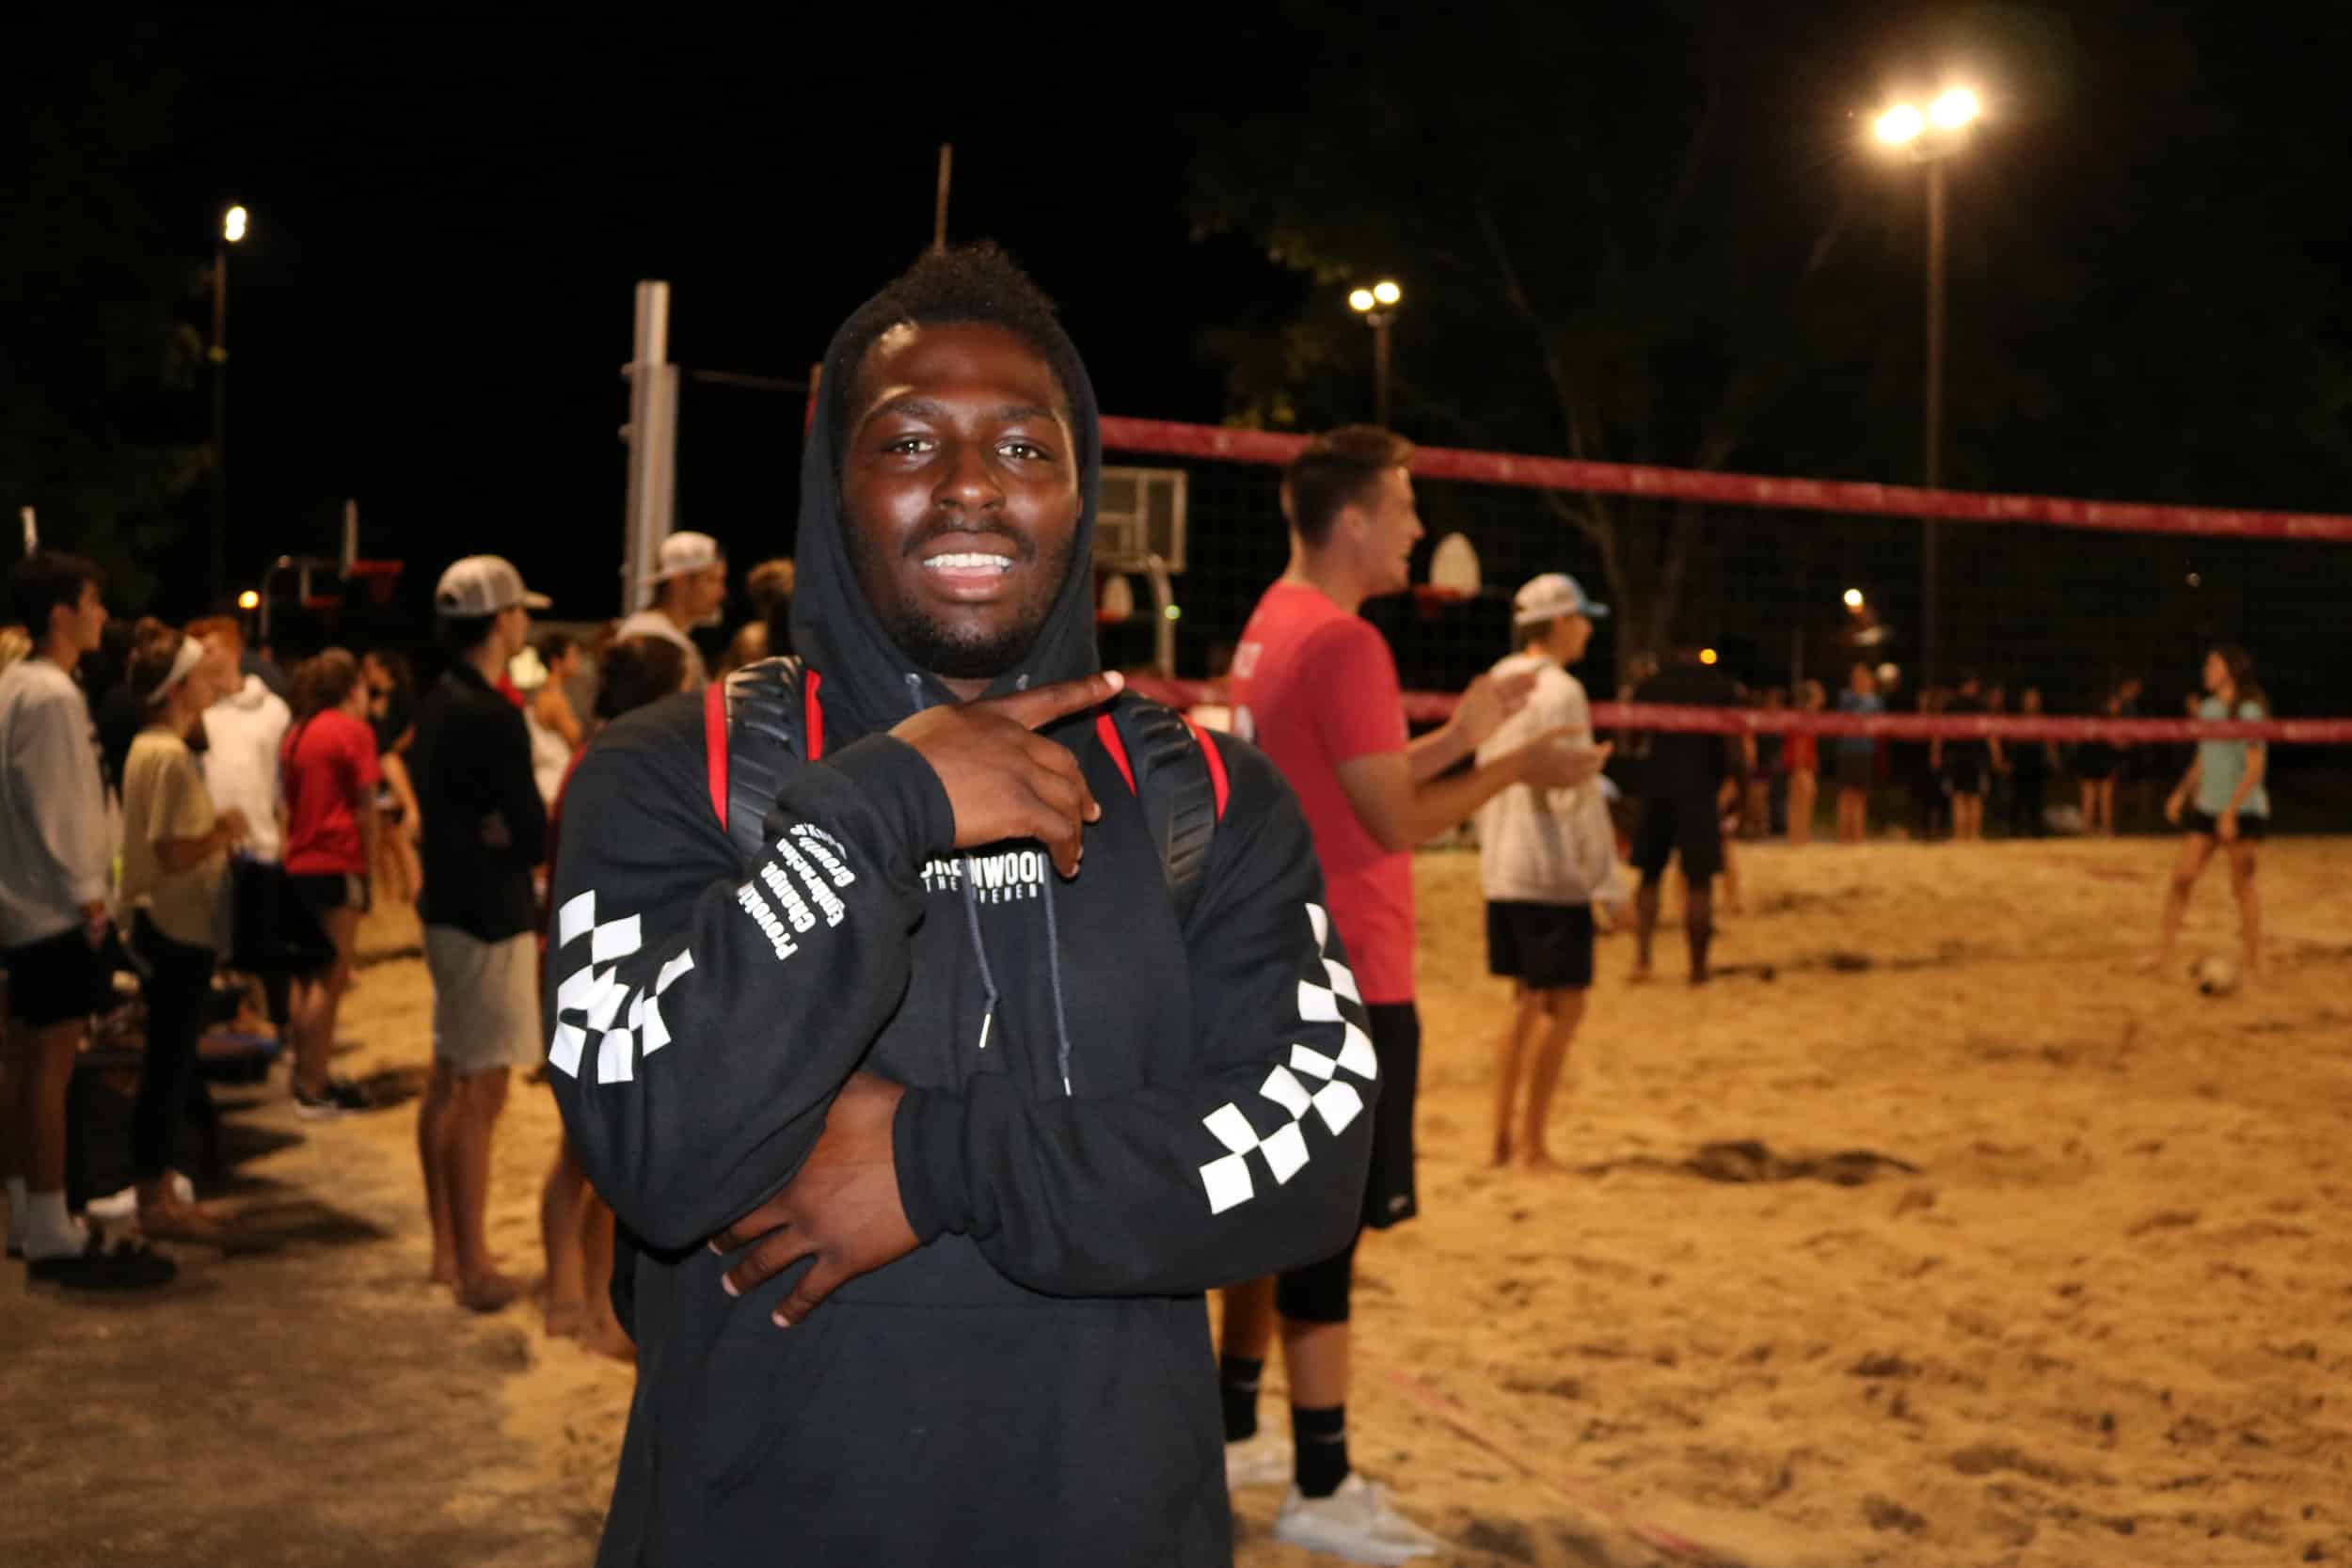 Junior, Emmanuel Harrison, is on the volleyball courts playing with Urbanwood and is pumped for the tournament on Monday night.